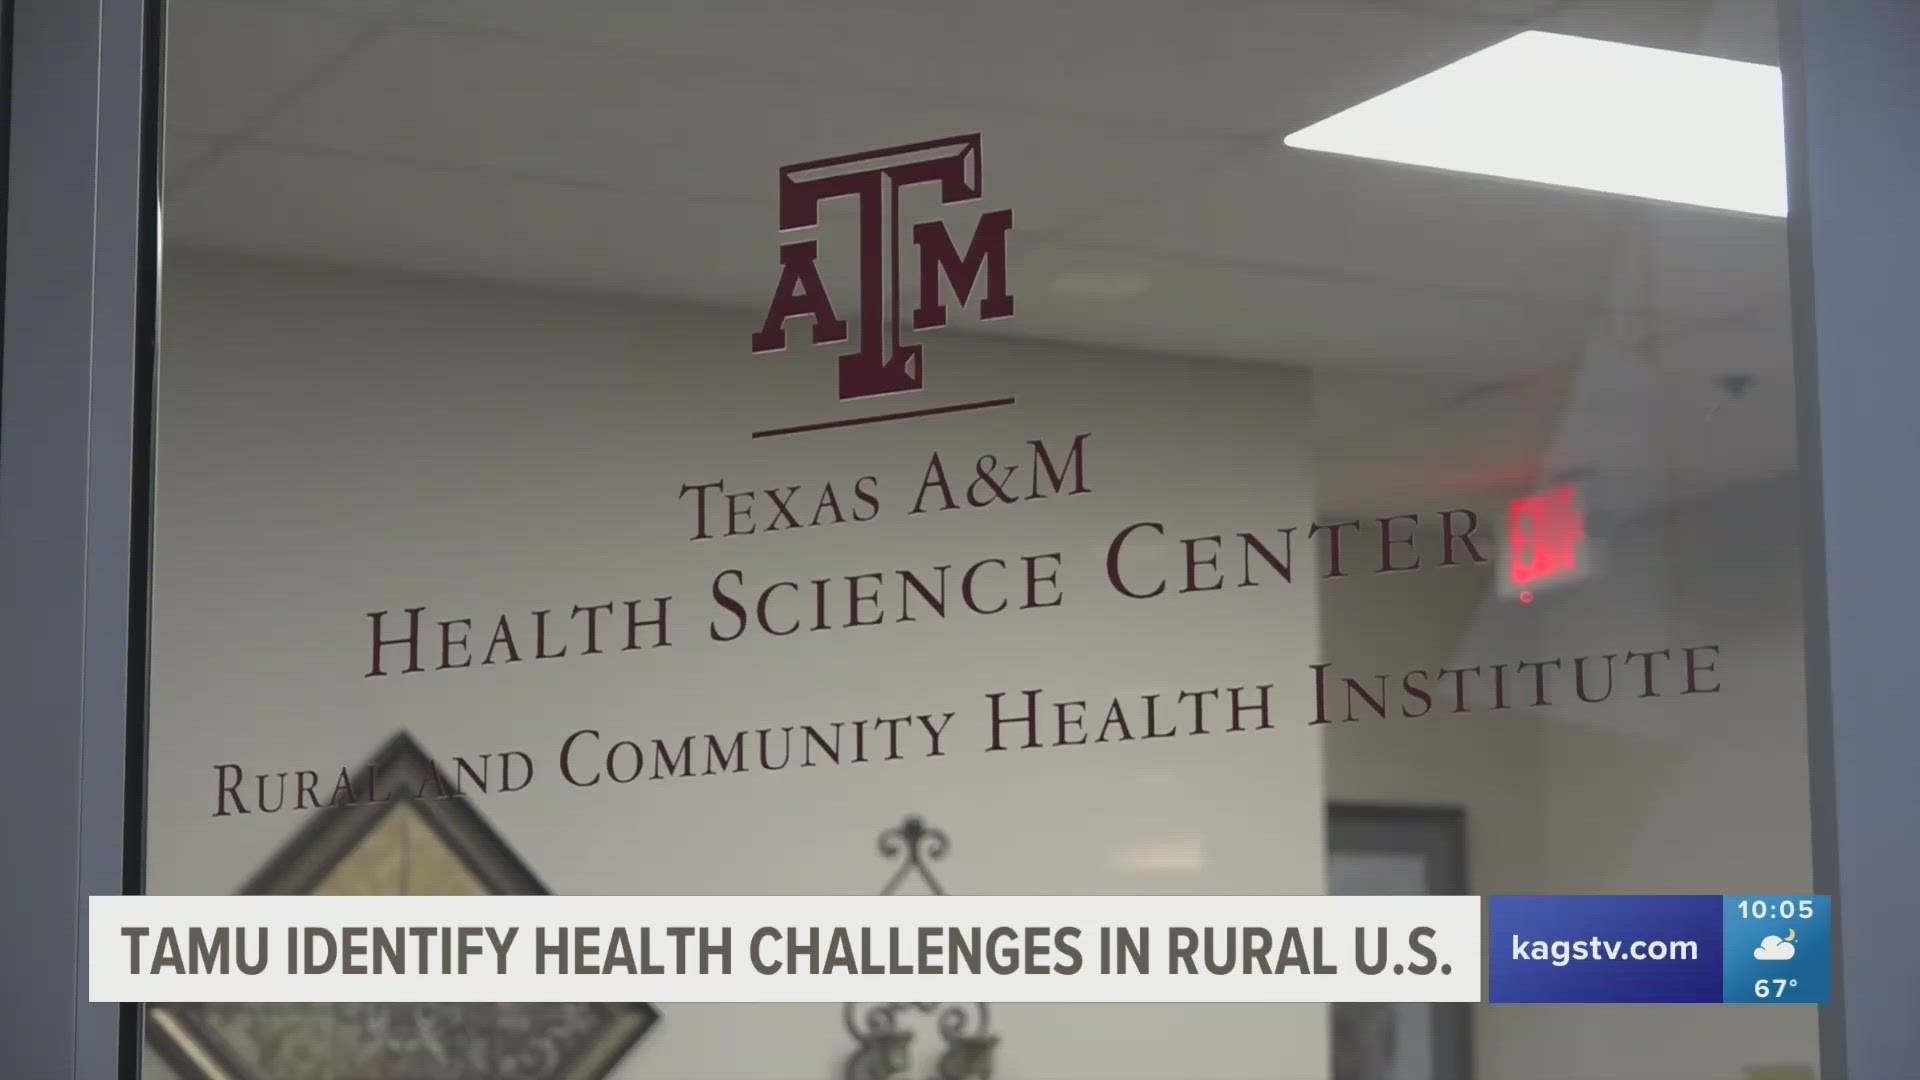 Kia Parsi, Executive Director of A.R.C.H.I., talked with KAGS about some of the most critical health issues facing rural Americans following a recent survey.